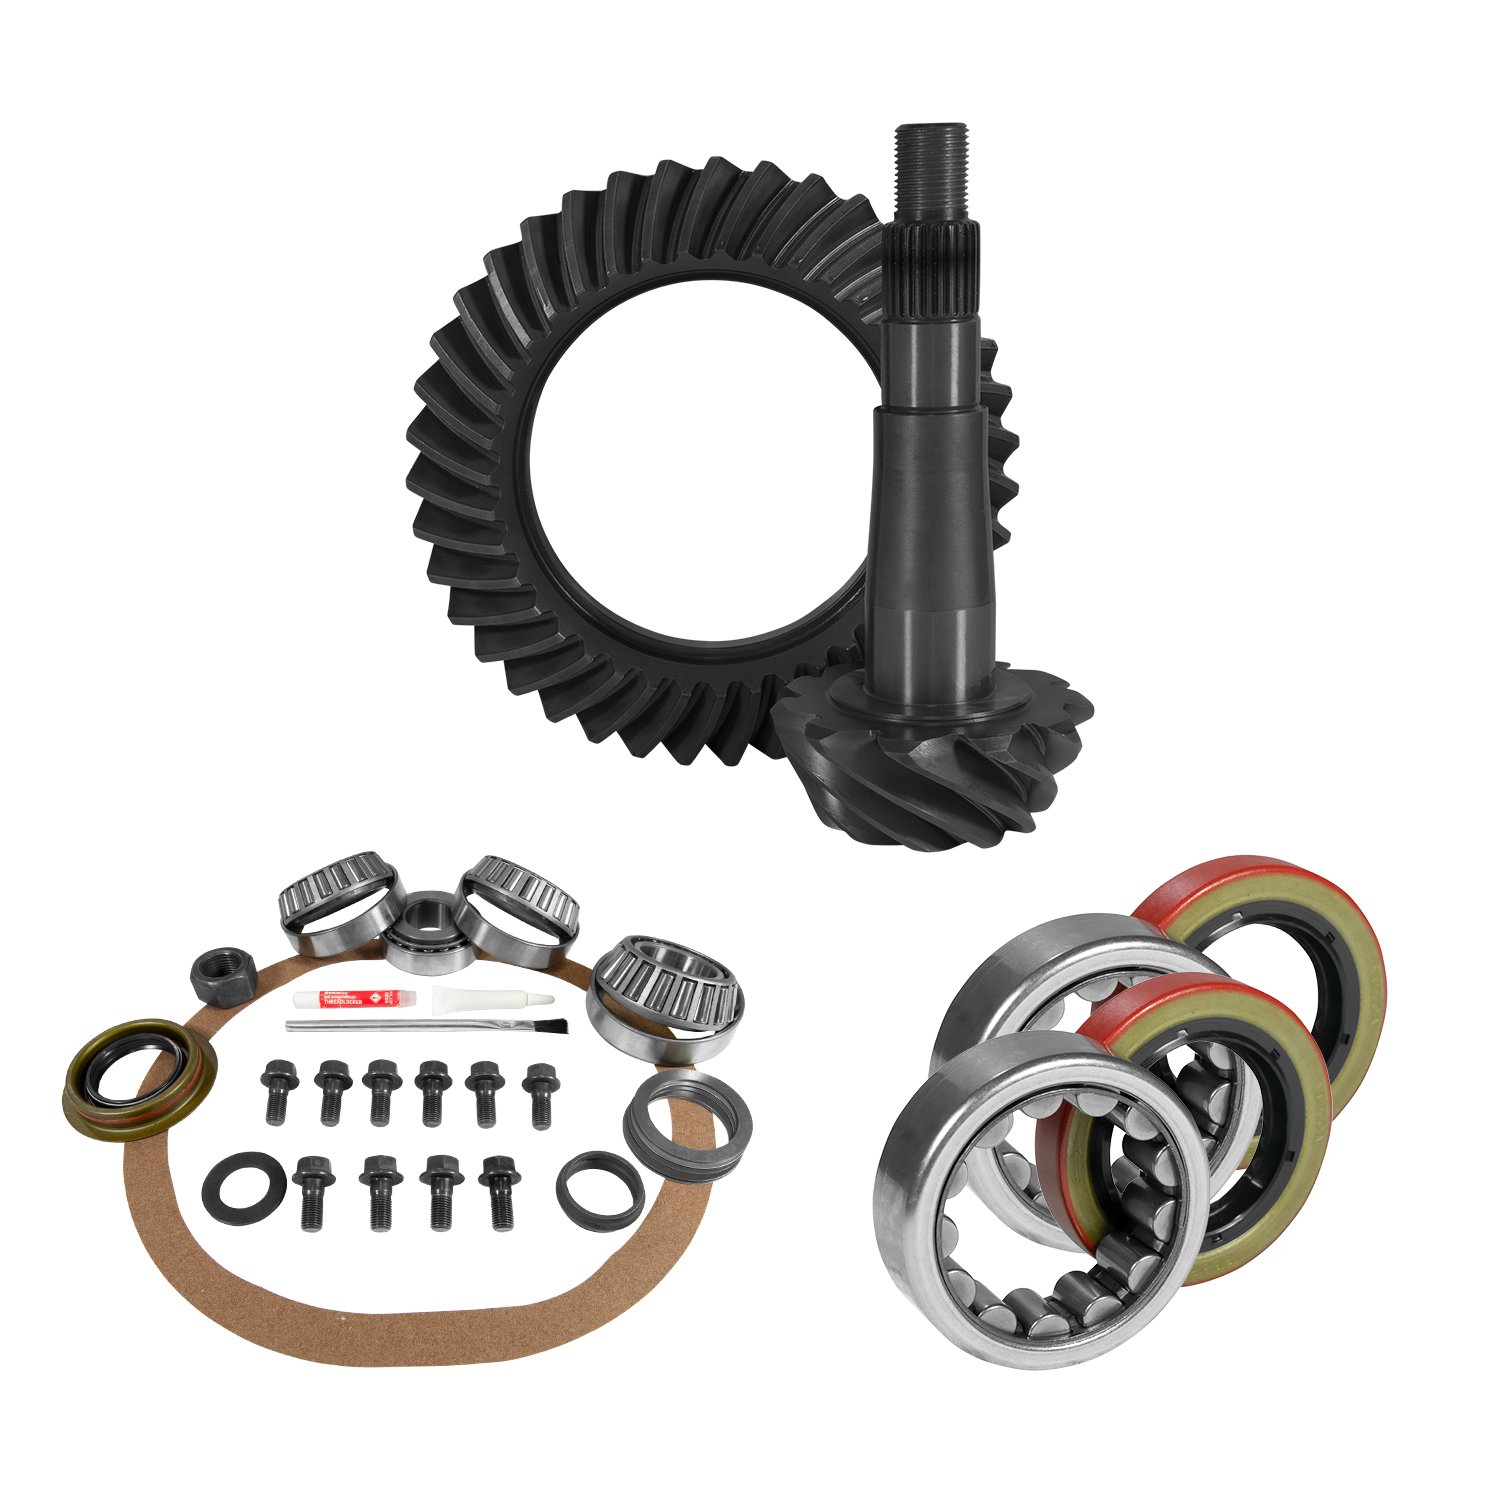 USA Standard 10899 8.25 in. Chy 3.55 Rear Ring & Pinion Install Kit, 1.618 in. Id Axle Bearings & Seals